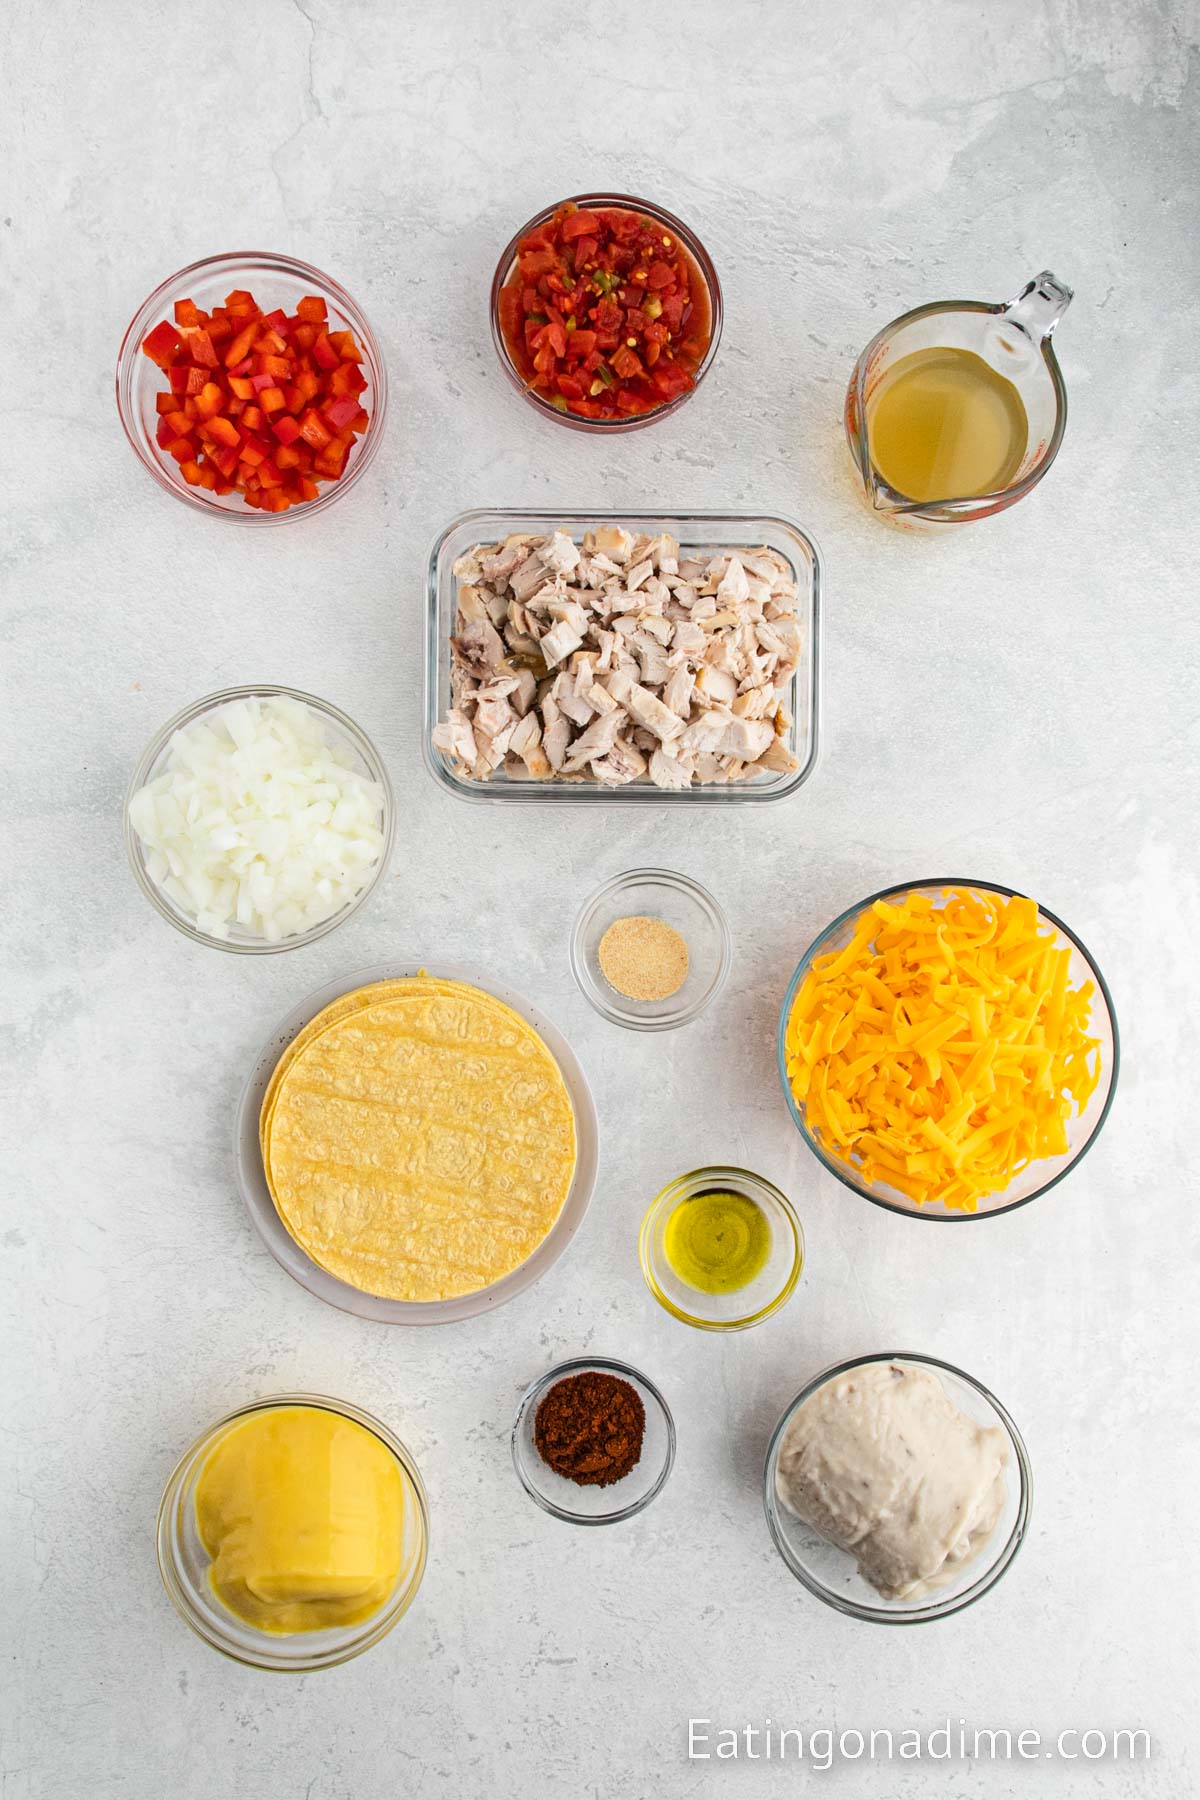 Ingredients needed for King Ranch Chicken Casserole - Olive oil, onion, bell pepper, cream of mushroom soup, cream of chicken soup, diced tomatoes with green chilies, chicken broth, chili powder, garlic powder, shredded chicken, corn tortillas, cheddar cheese